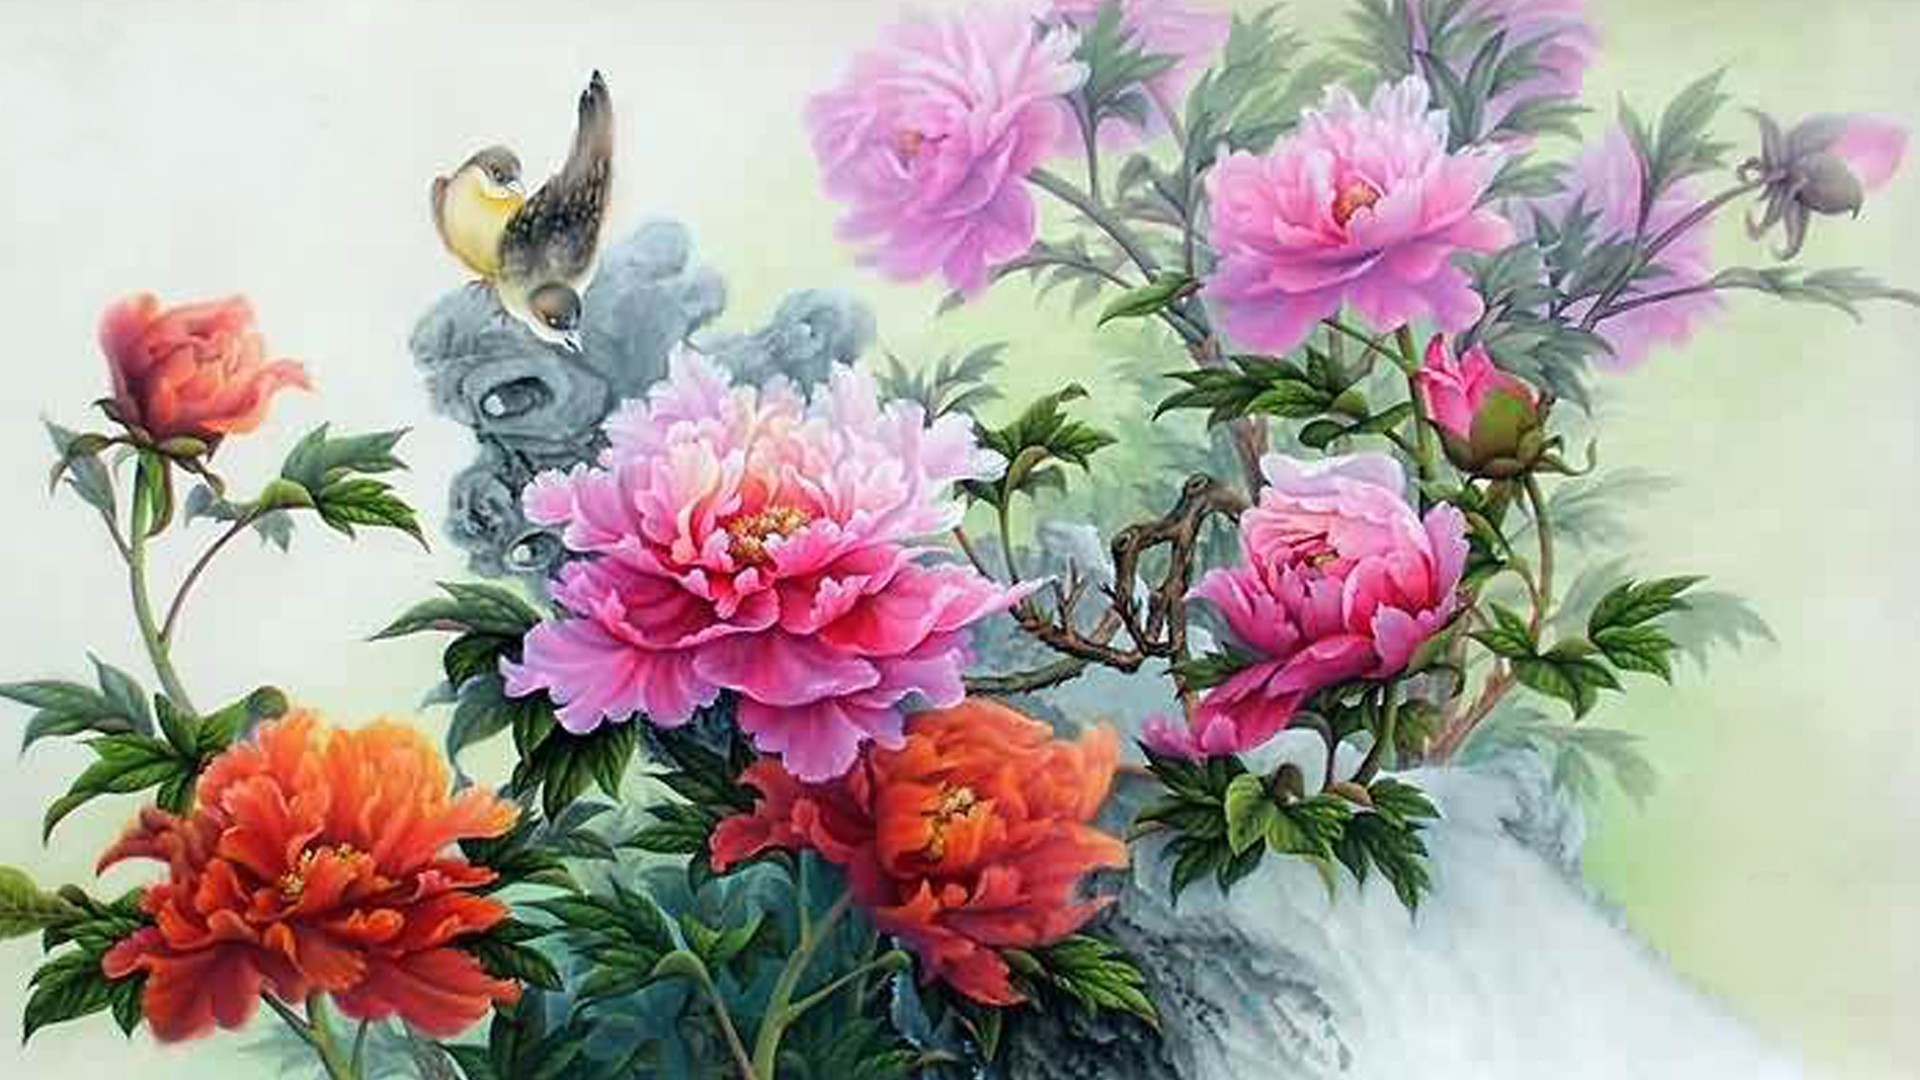 Bird Tag - Summer Flowers Chinese Painting - HD Wallpaper 